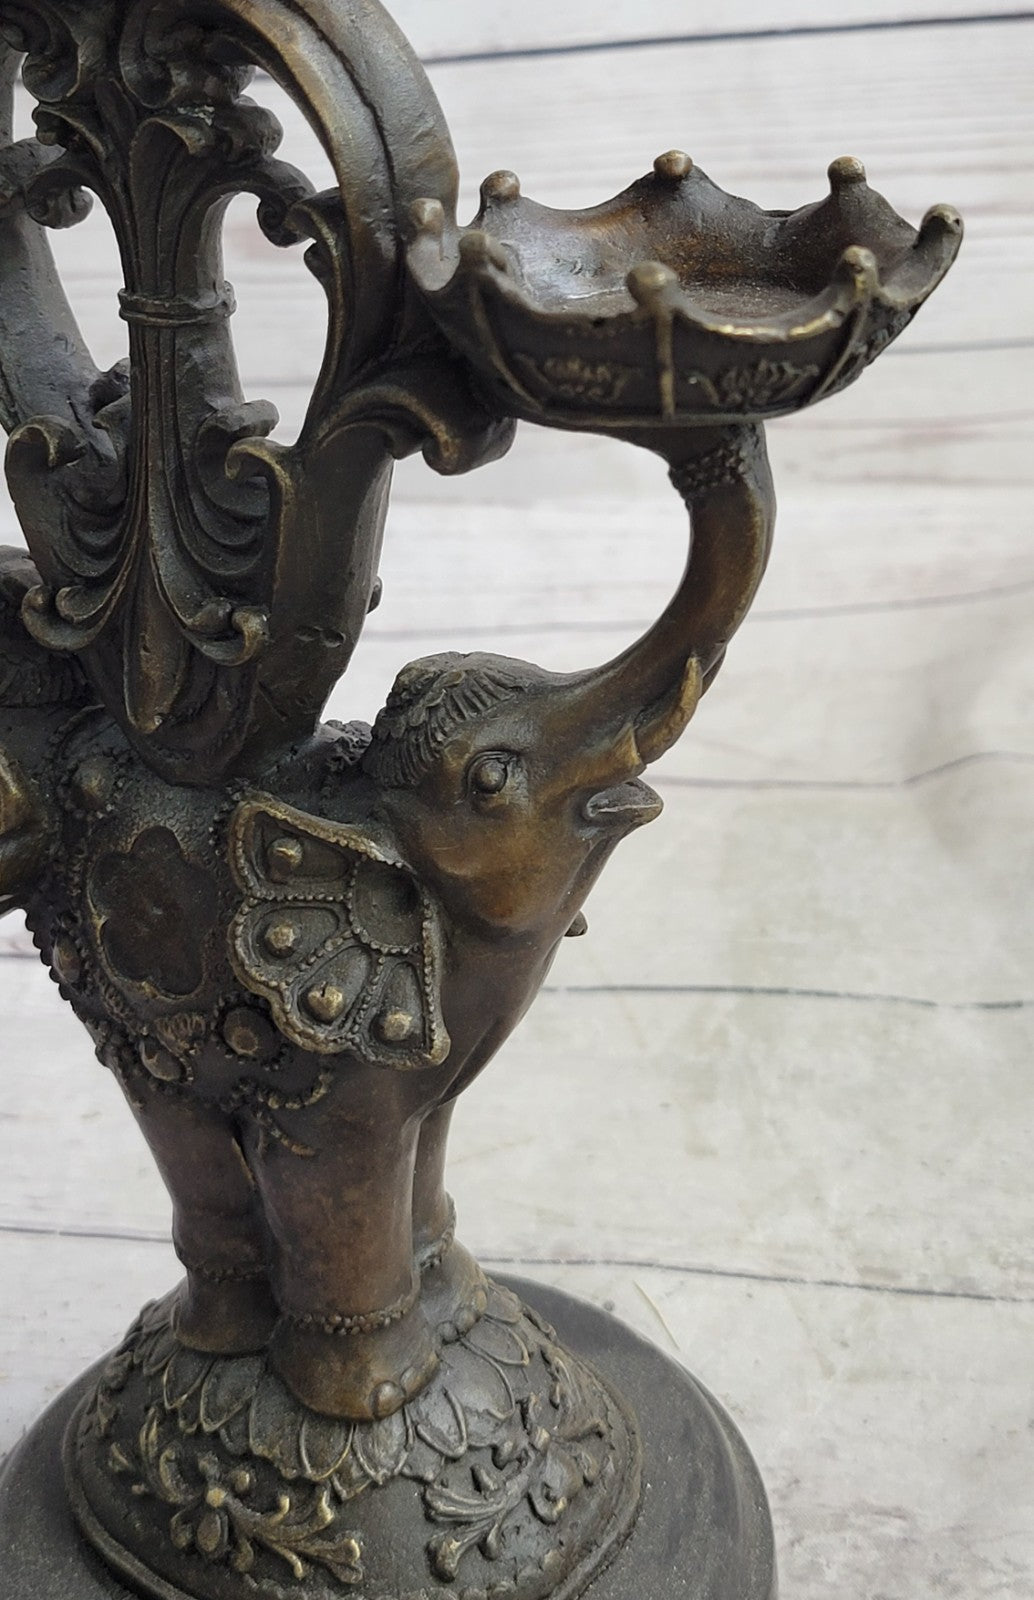 Two Headed Elephant Candle Holder Bronze Sculpture Marble Statue Figurine Figure